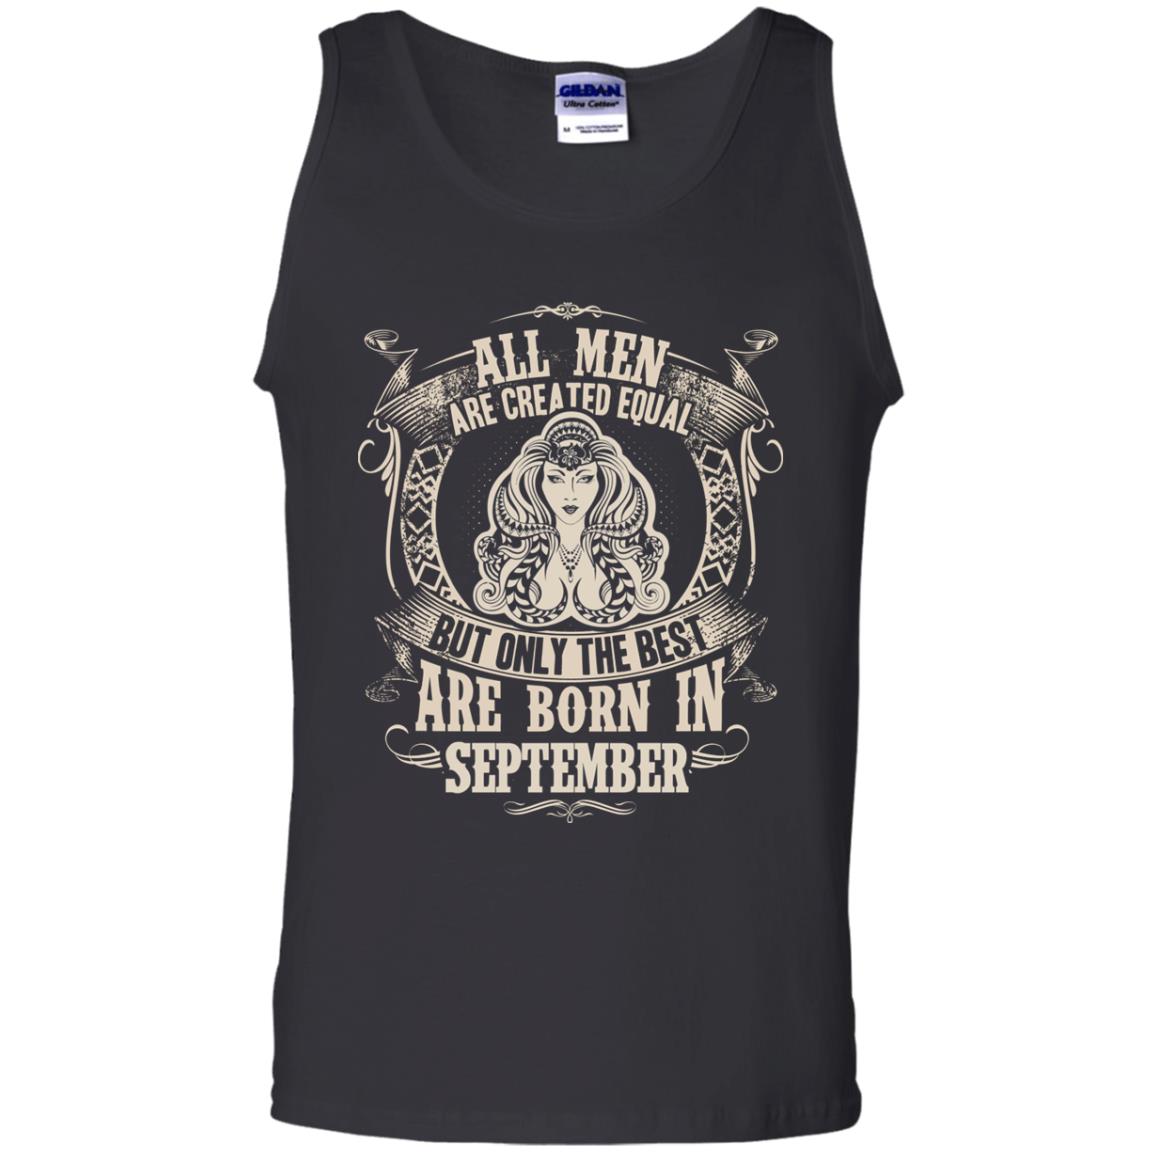 All Men Are Created Equal, But Only The Best Are Born In September T-shirtG220 Gildan 100% Cotton Tank Top